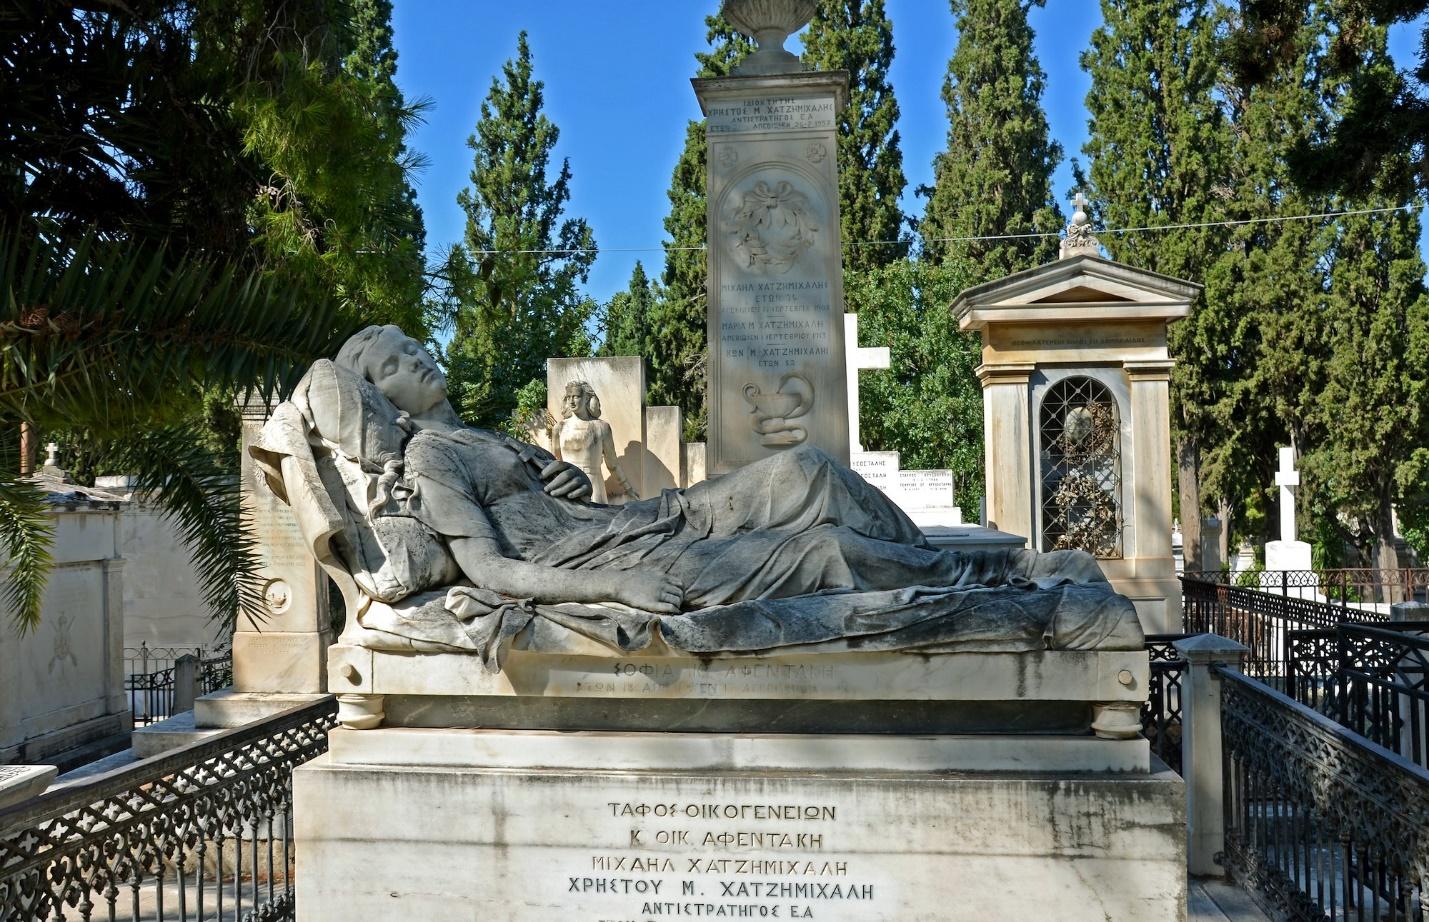 “The Sleeping Girl by Desolation Road”, sculpt at the 1rst Cemetery of Athens by the famous Greek sculptor Yannoulis Chalepas